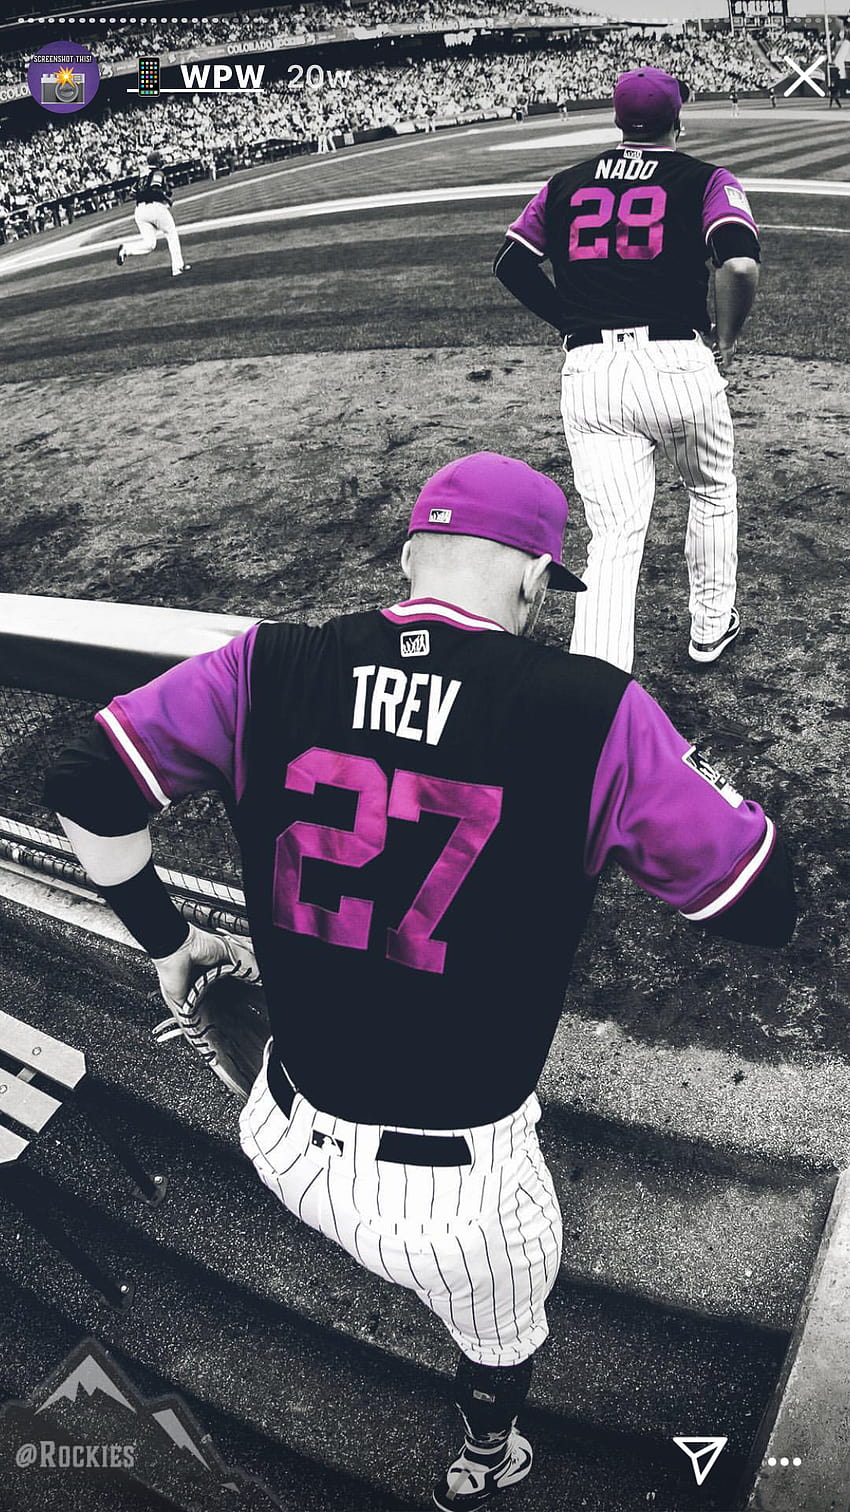 Colorado Rockies on Twitter Wallpaper on a Thursday Were making  custom City Connectwallpapers Drop us your name and jersey number  httpstcoGZOb6hS1WN  Twitter